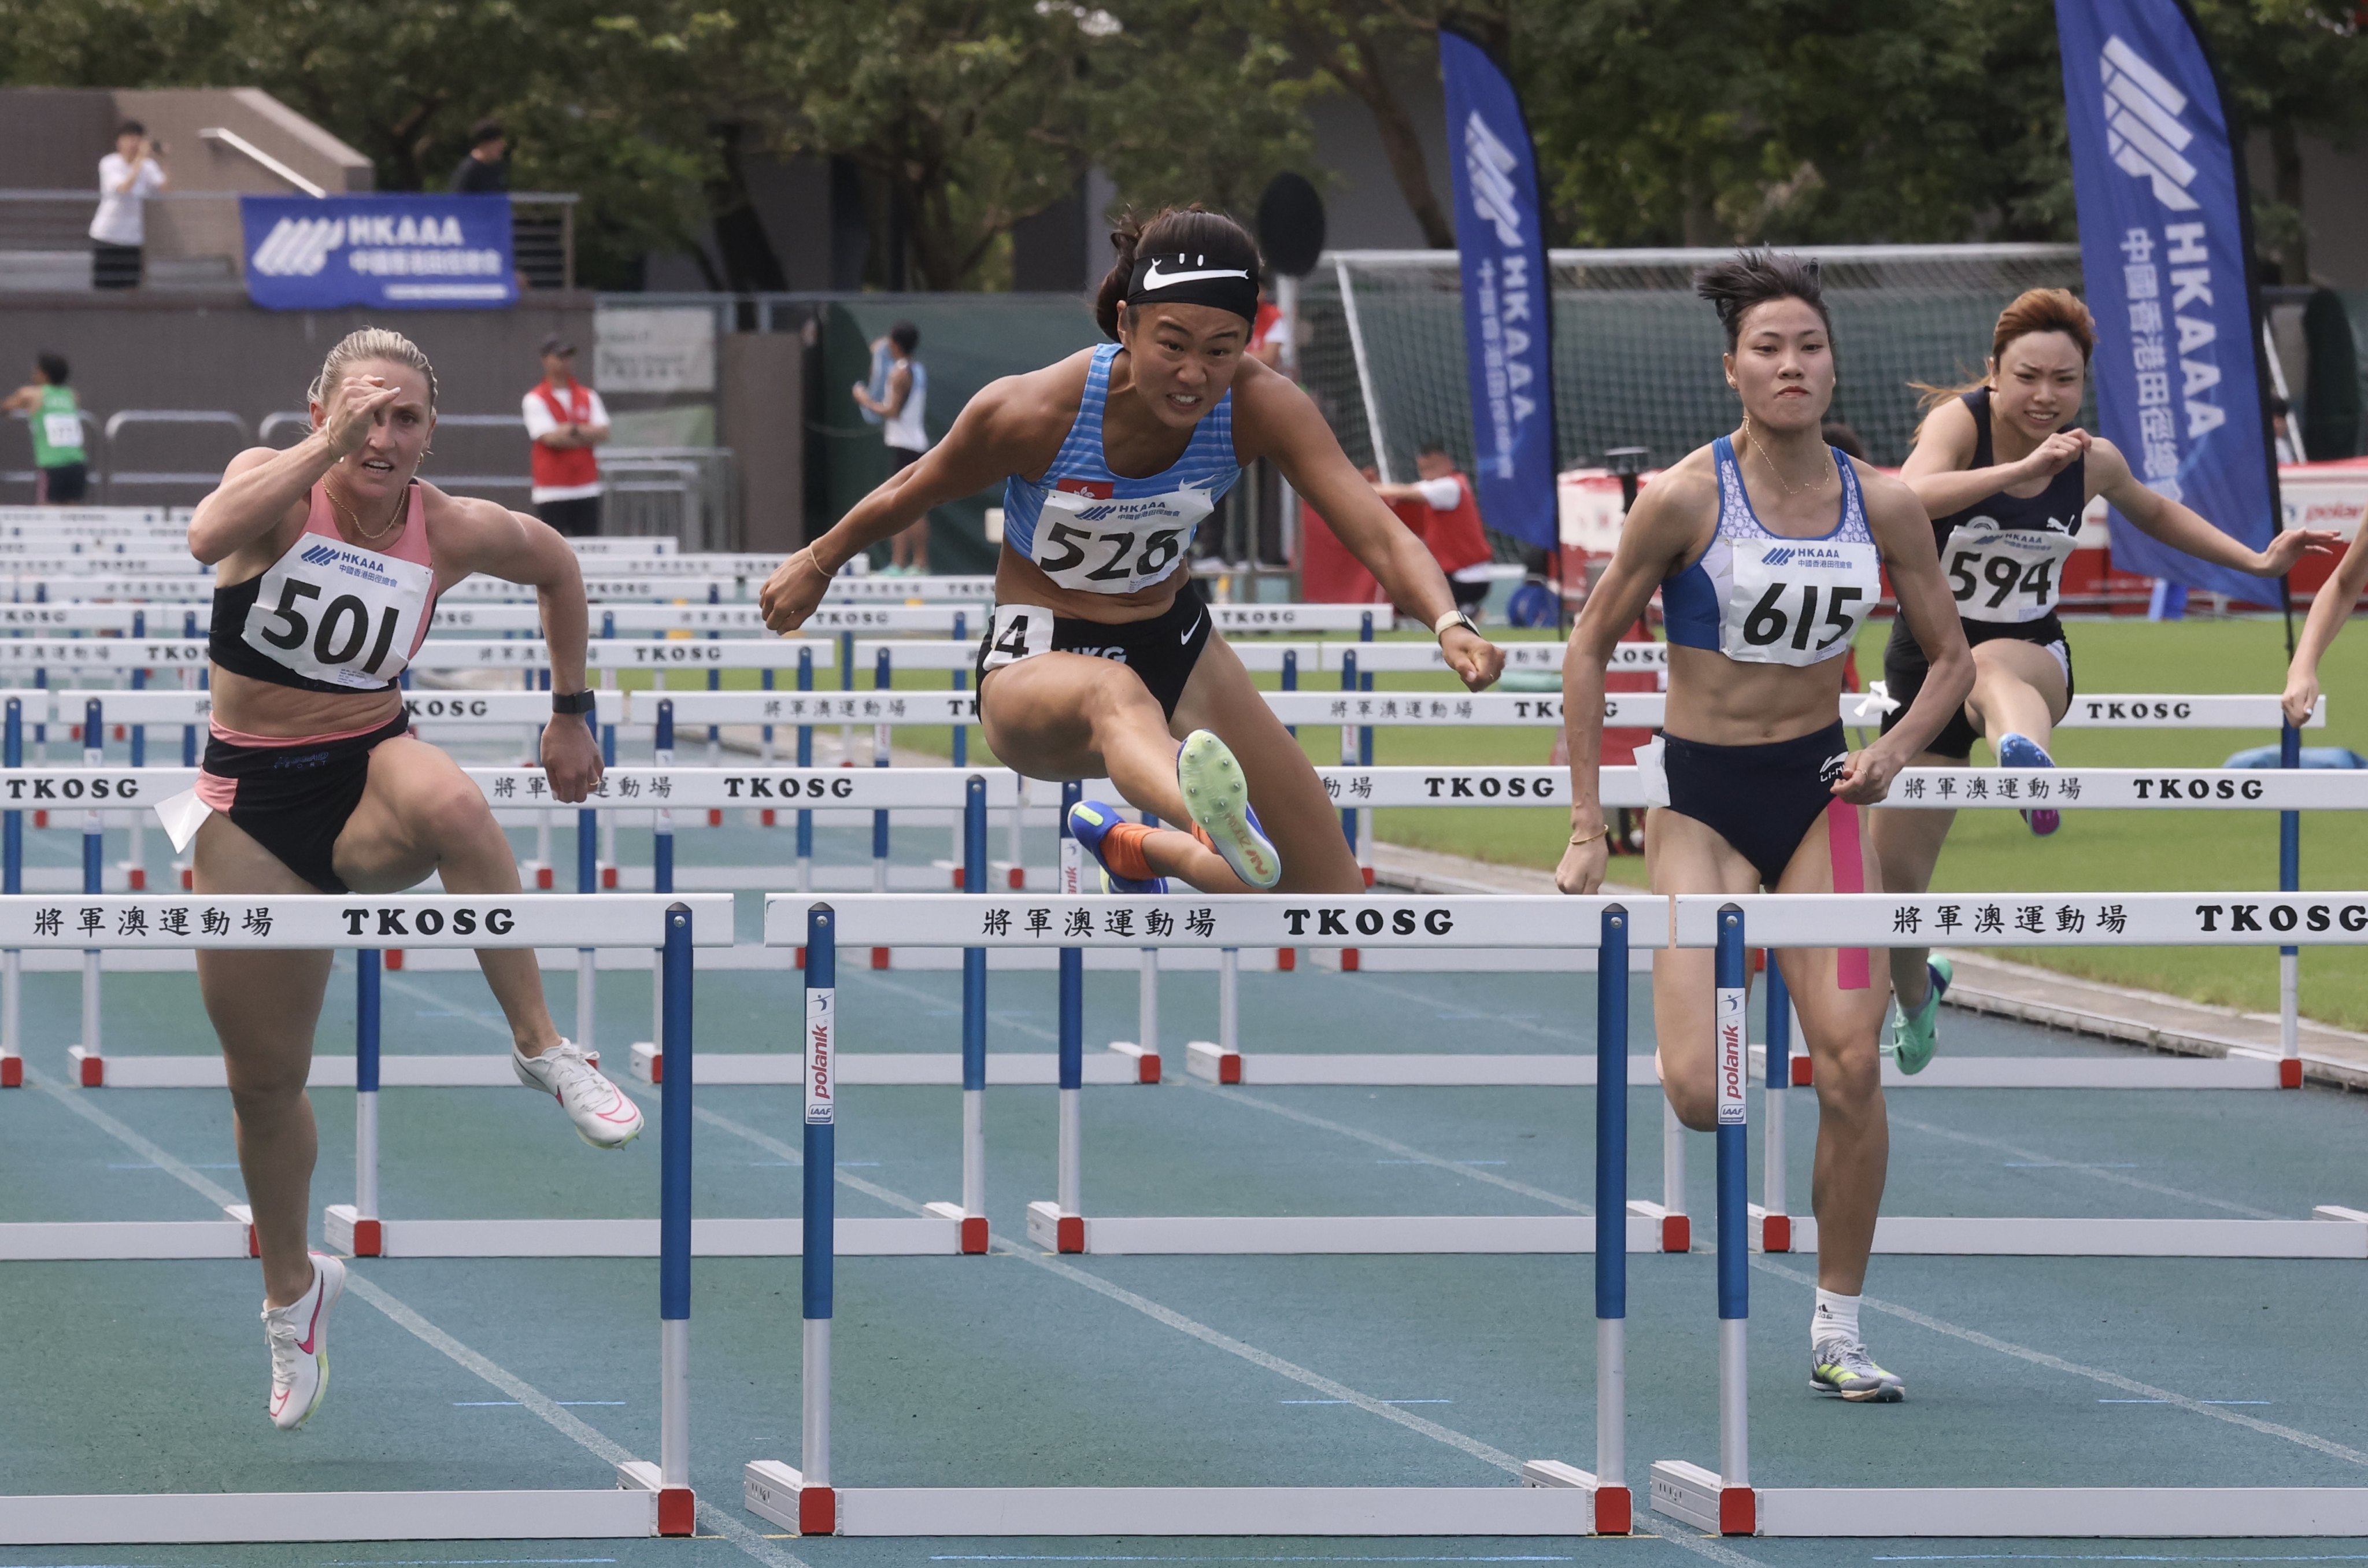 Vera Lui (No 526) is flanked by Abbie Taddeo (left) and Bui Thi Nguyen in the 100m hurdles final in Tseung Kwan O. Photo: Jonathan Wong